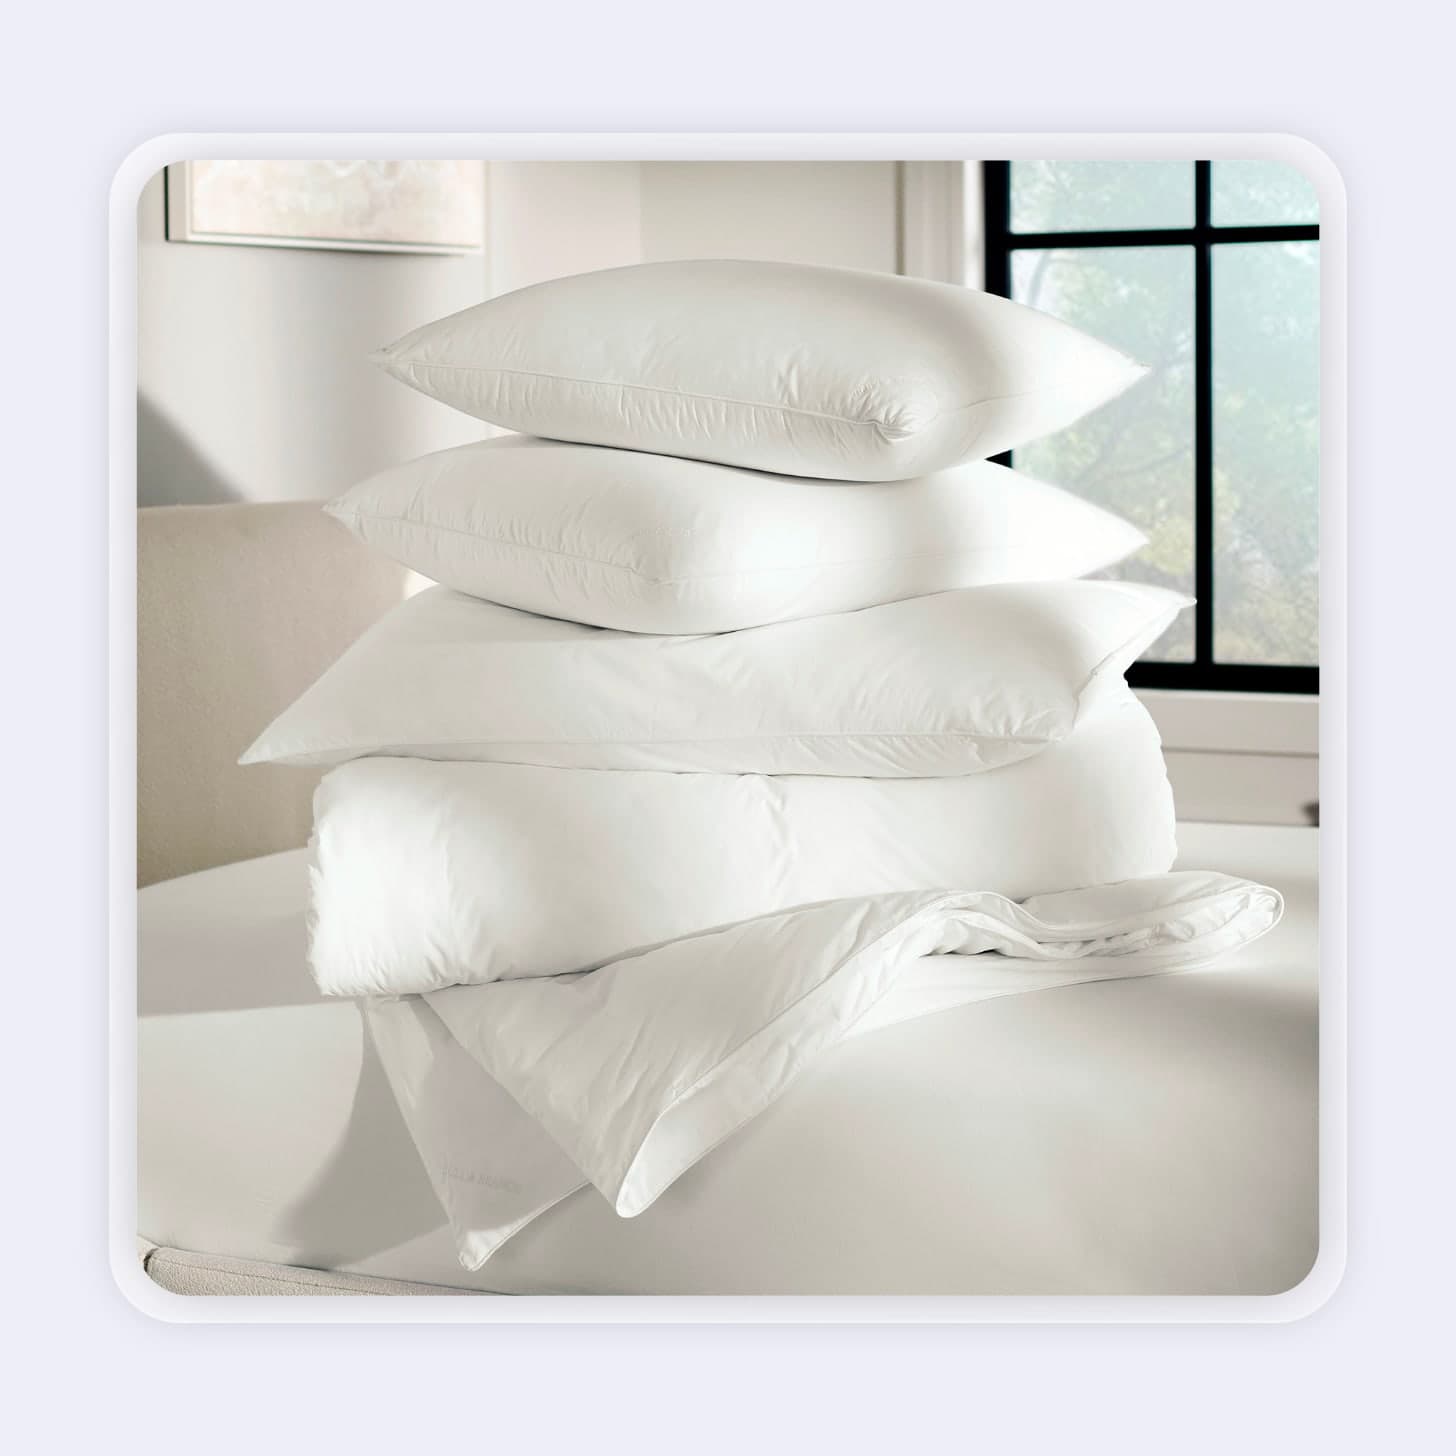 Three pillows stacked on top of bedding